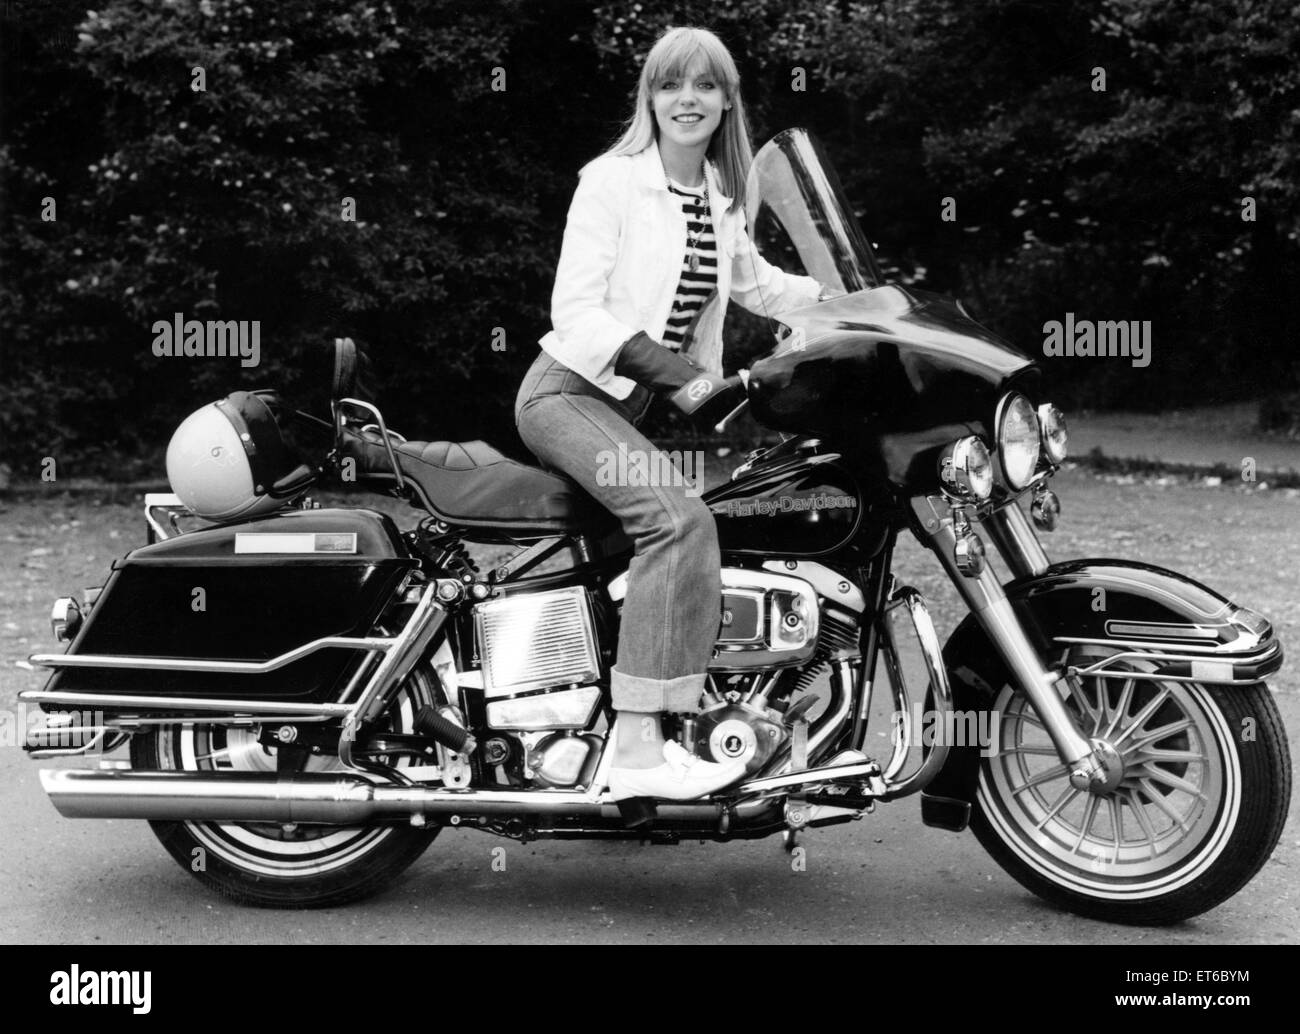 Motorcyclist Jane Donovan tries the massive 1350cc Harley-Davidson Electra Glide. Retailing at £3,999, the Harley was the most expensive production motorcycle on display at the recent Earls Court International Motor Cycle Show. 5th September 1978. Stock Photo